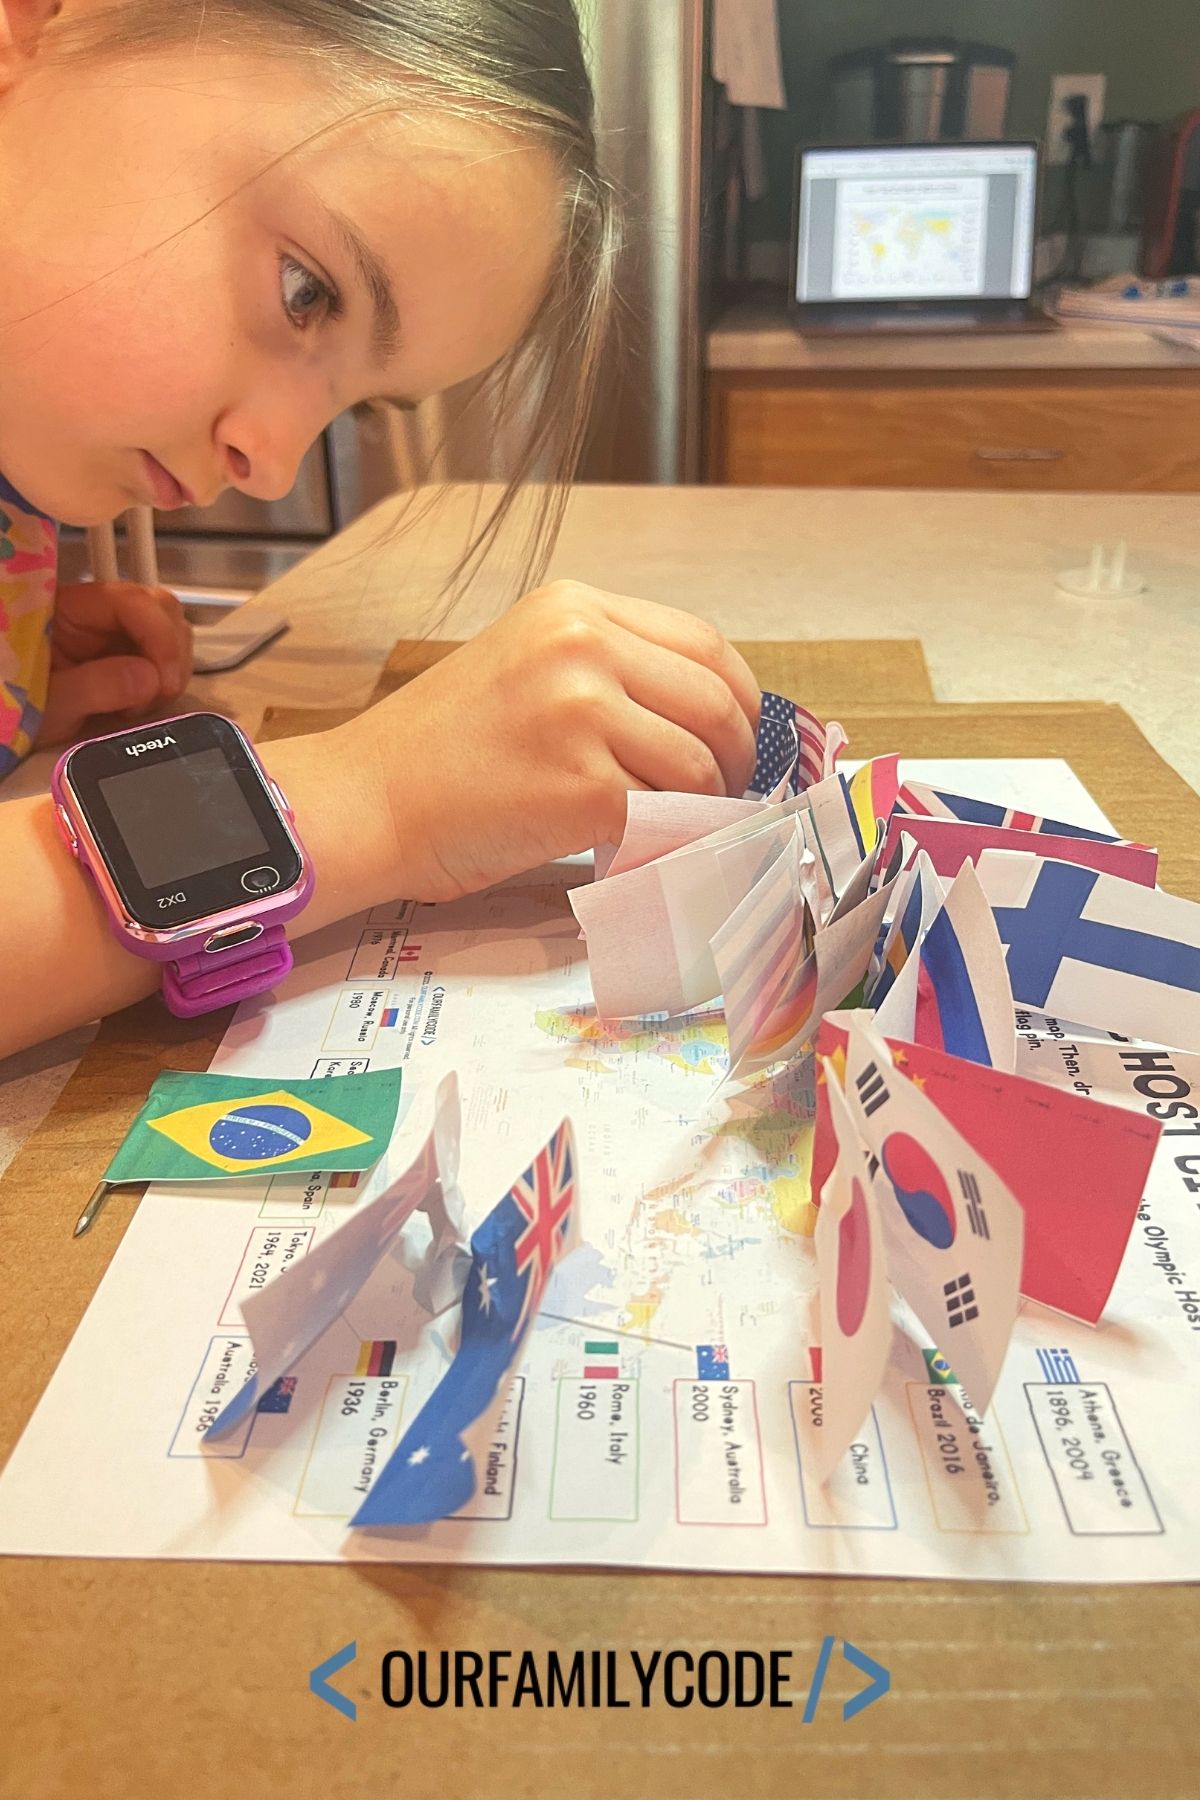 A picture of a child marking Olympic host cities on a printed map with cardboard underneath it and printed national flags made into map markers.